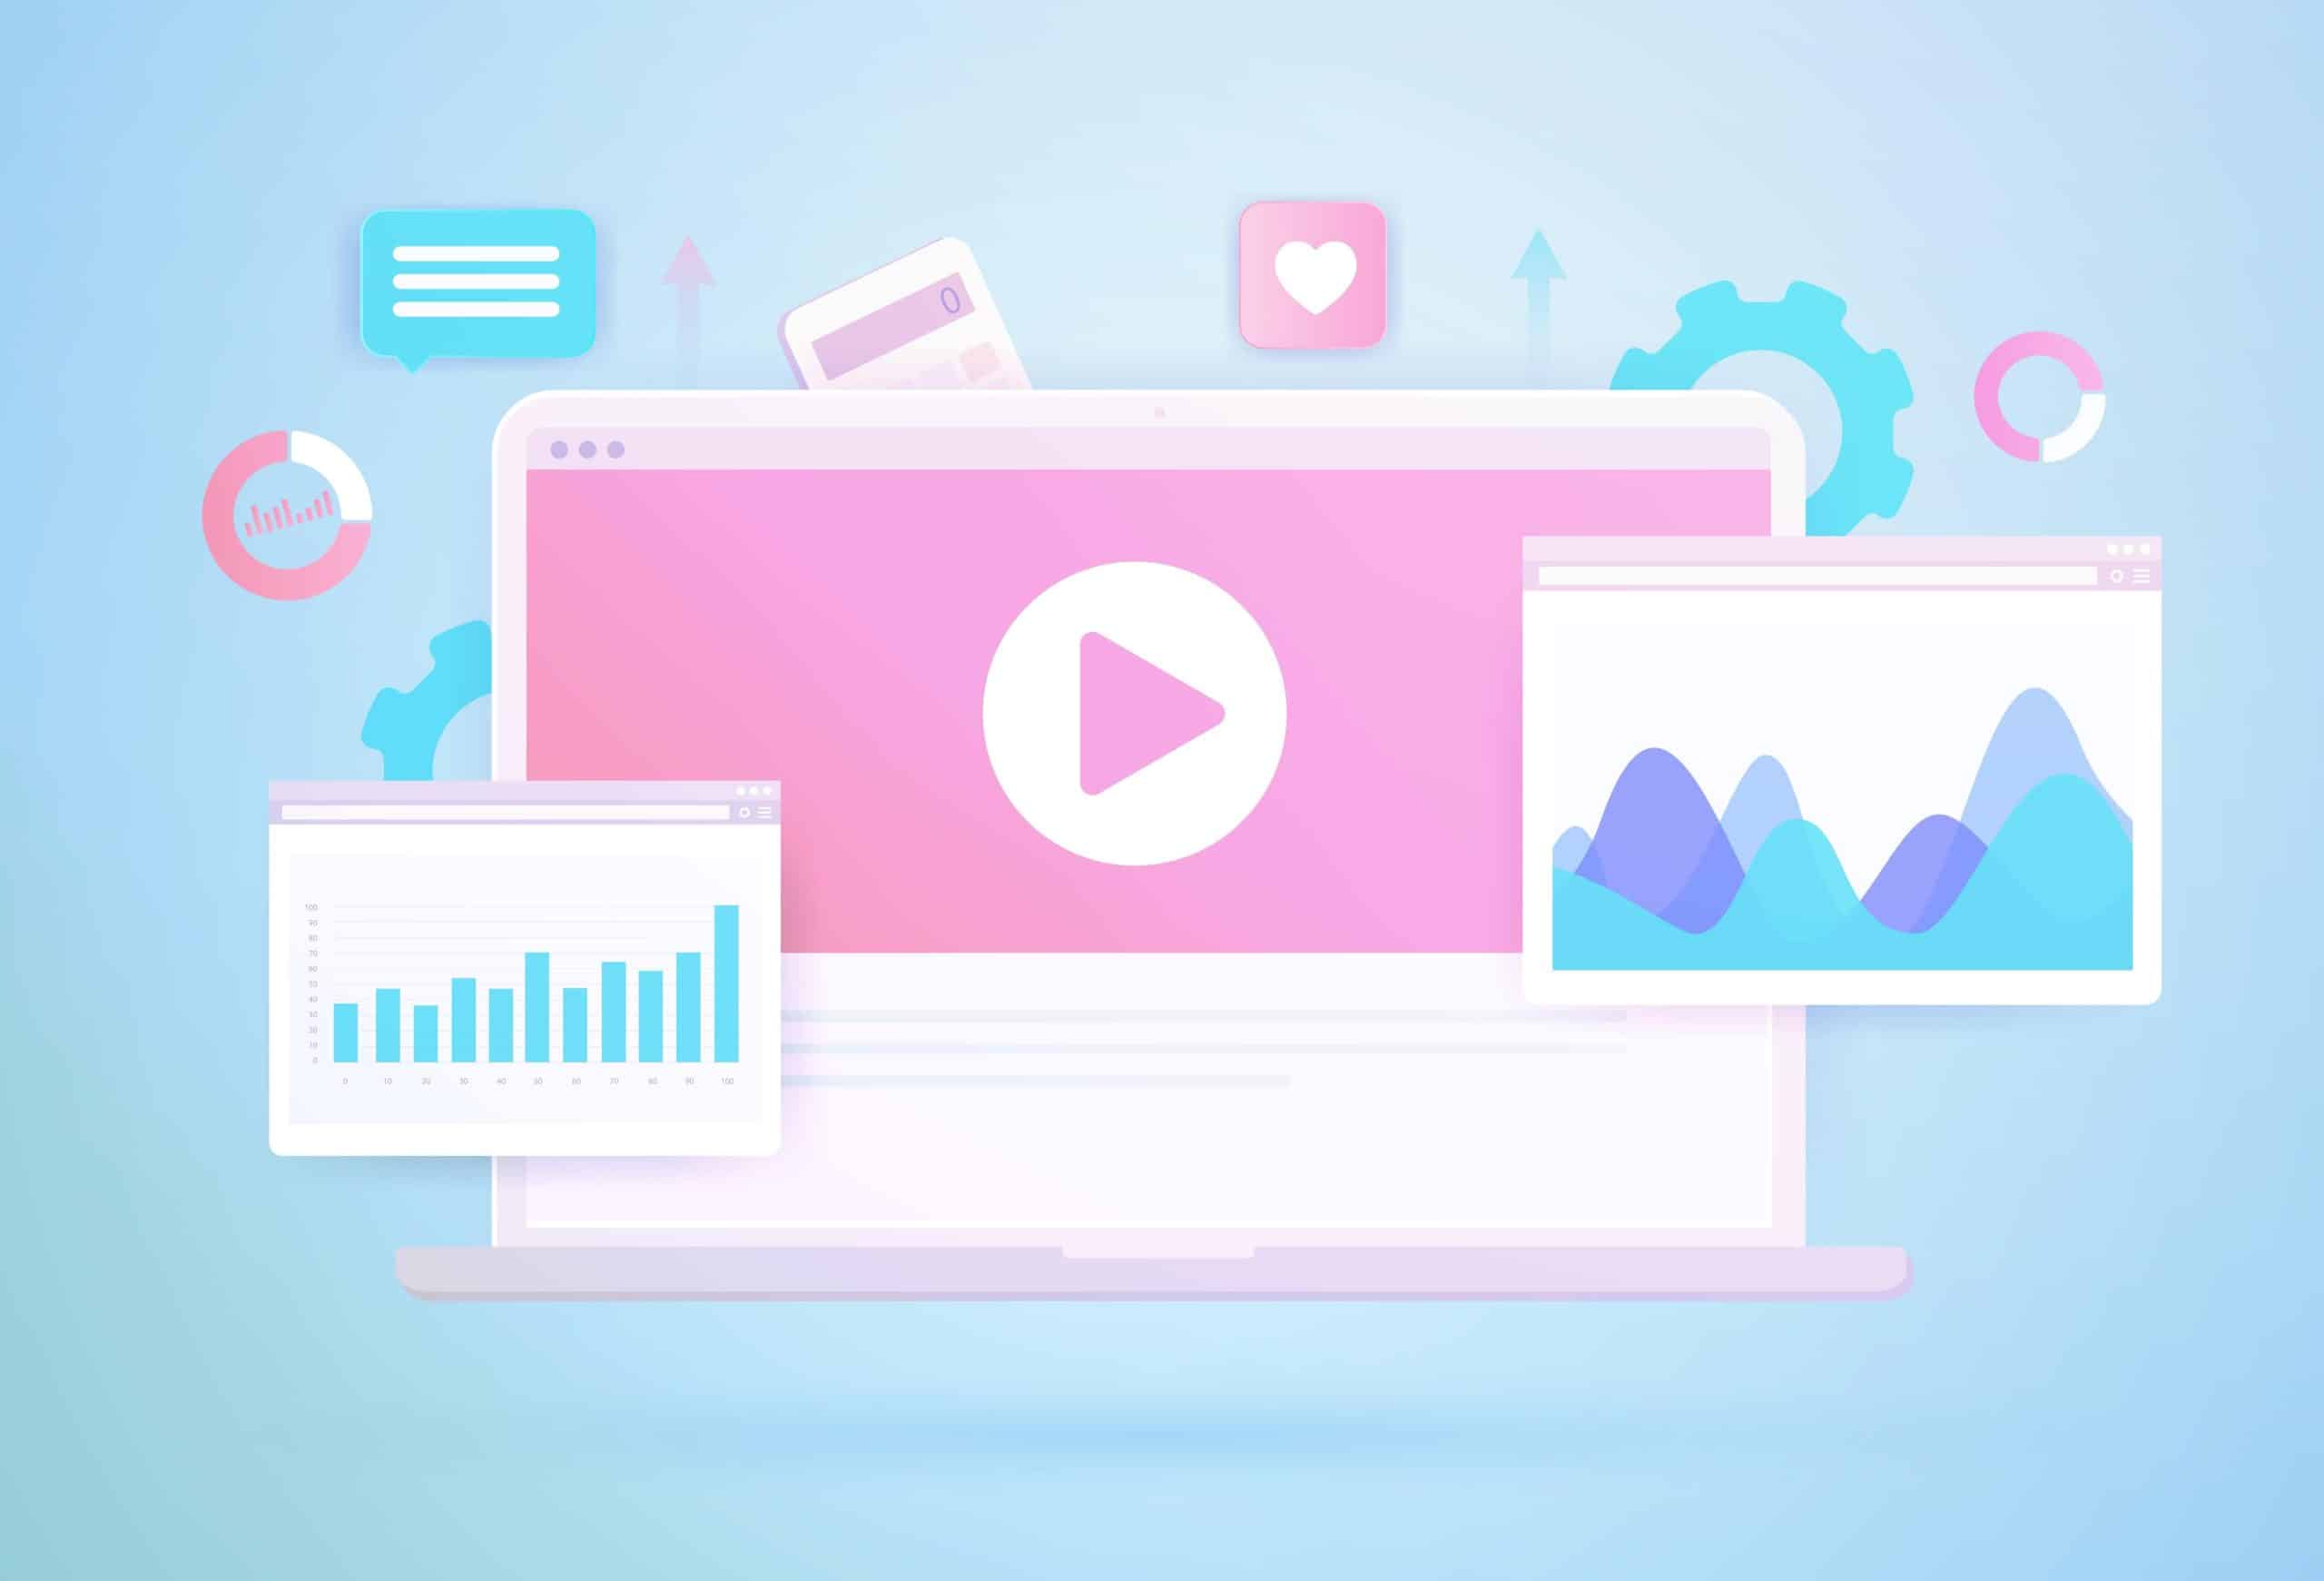 Video marketing production tools